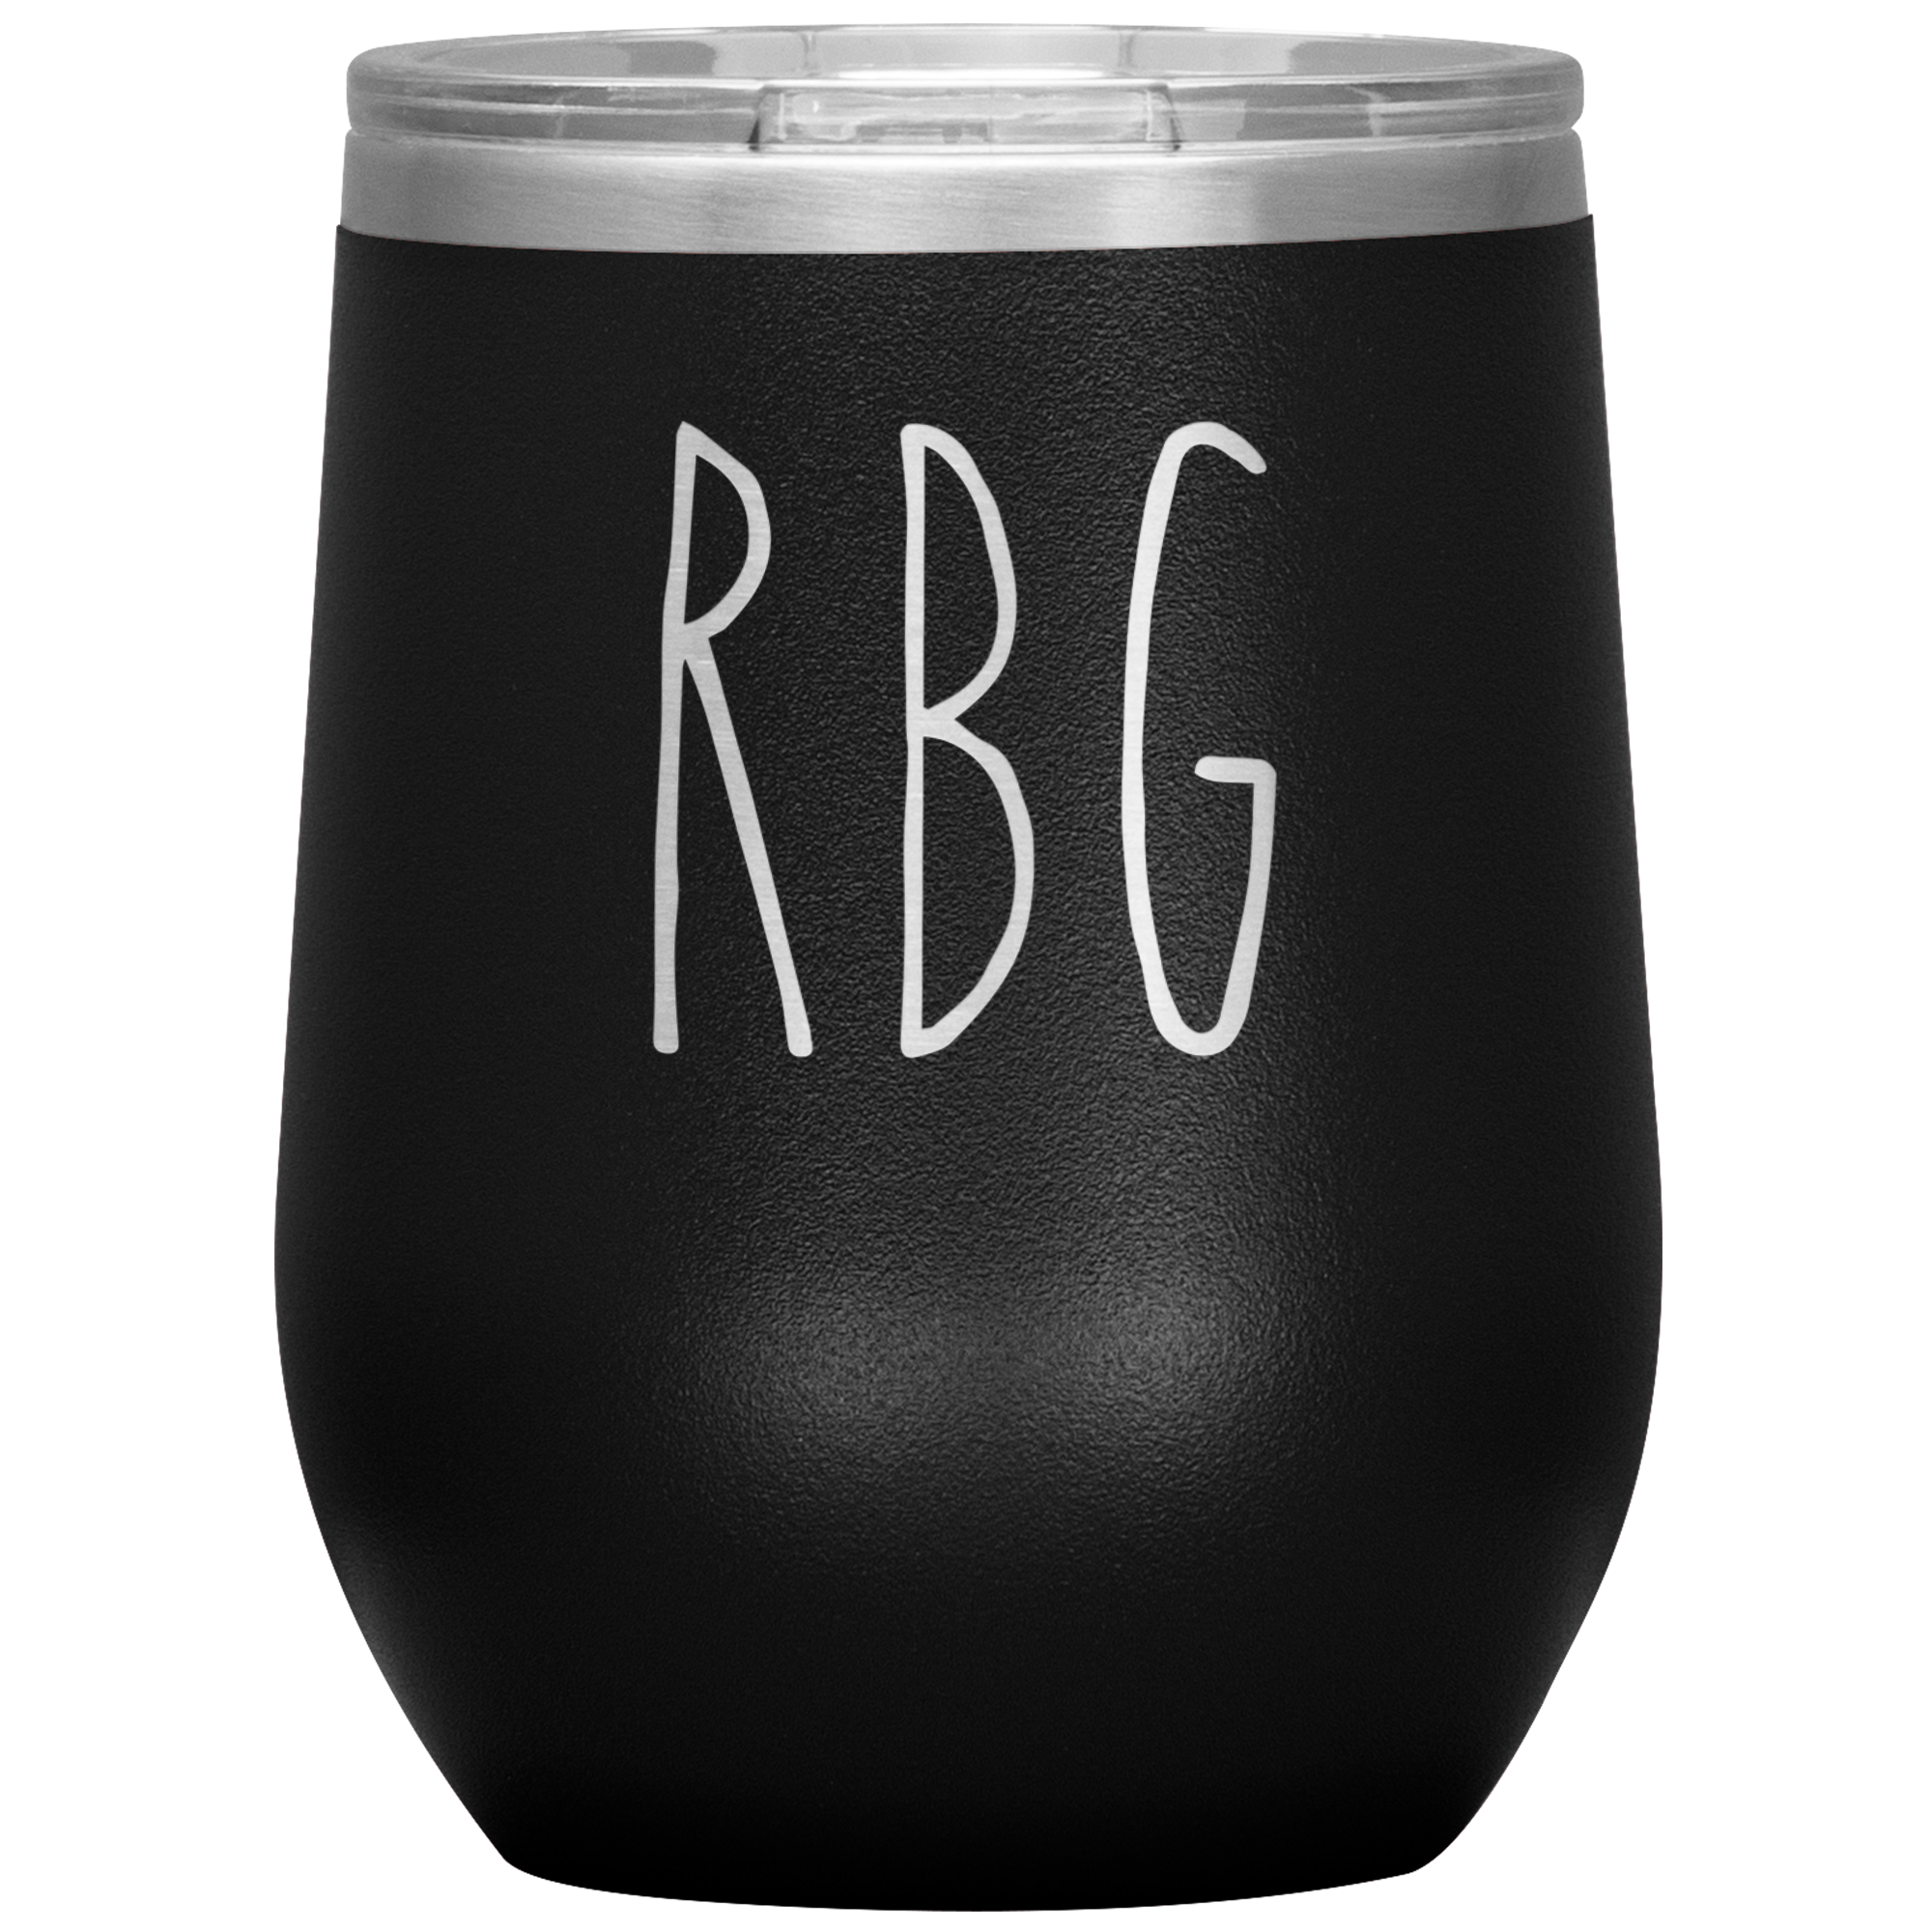 Ruth Bader Ginsburg Notorious RBG Wine Tumbler Stemless Stainless Steel Insulated BPA Free 12oz